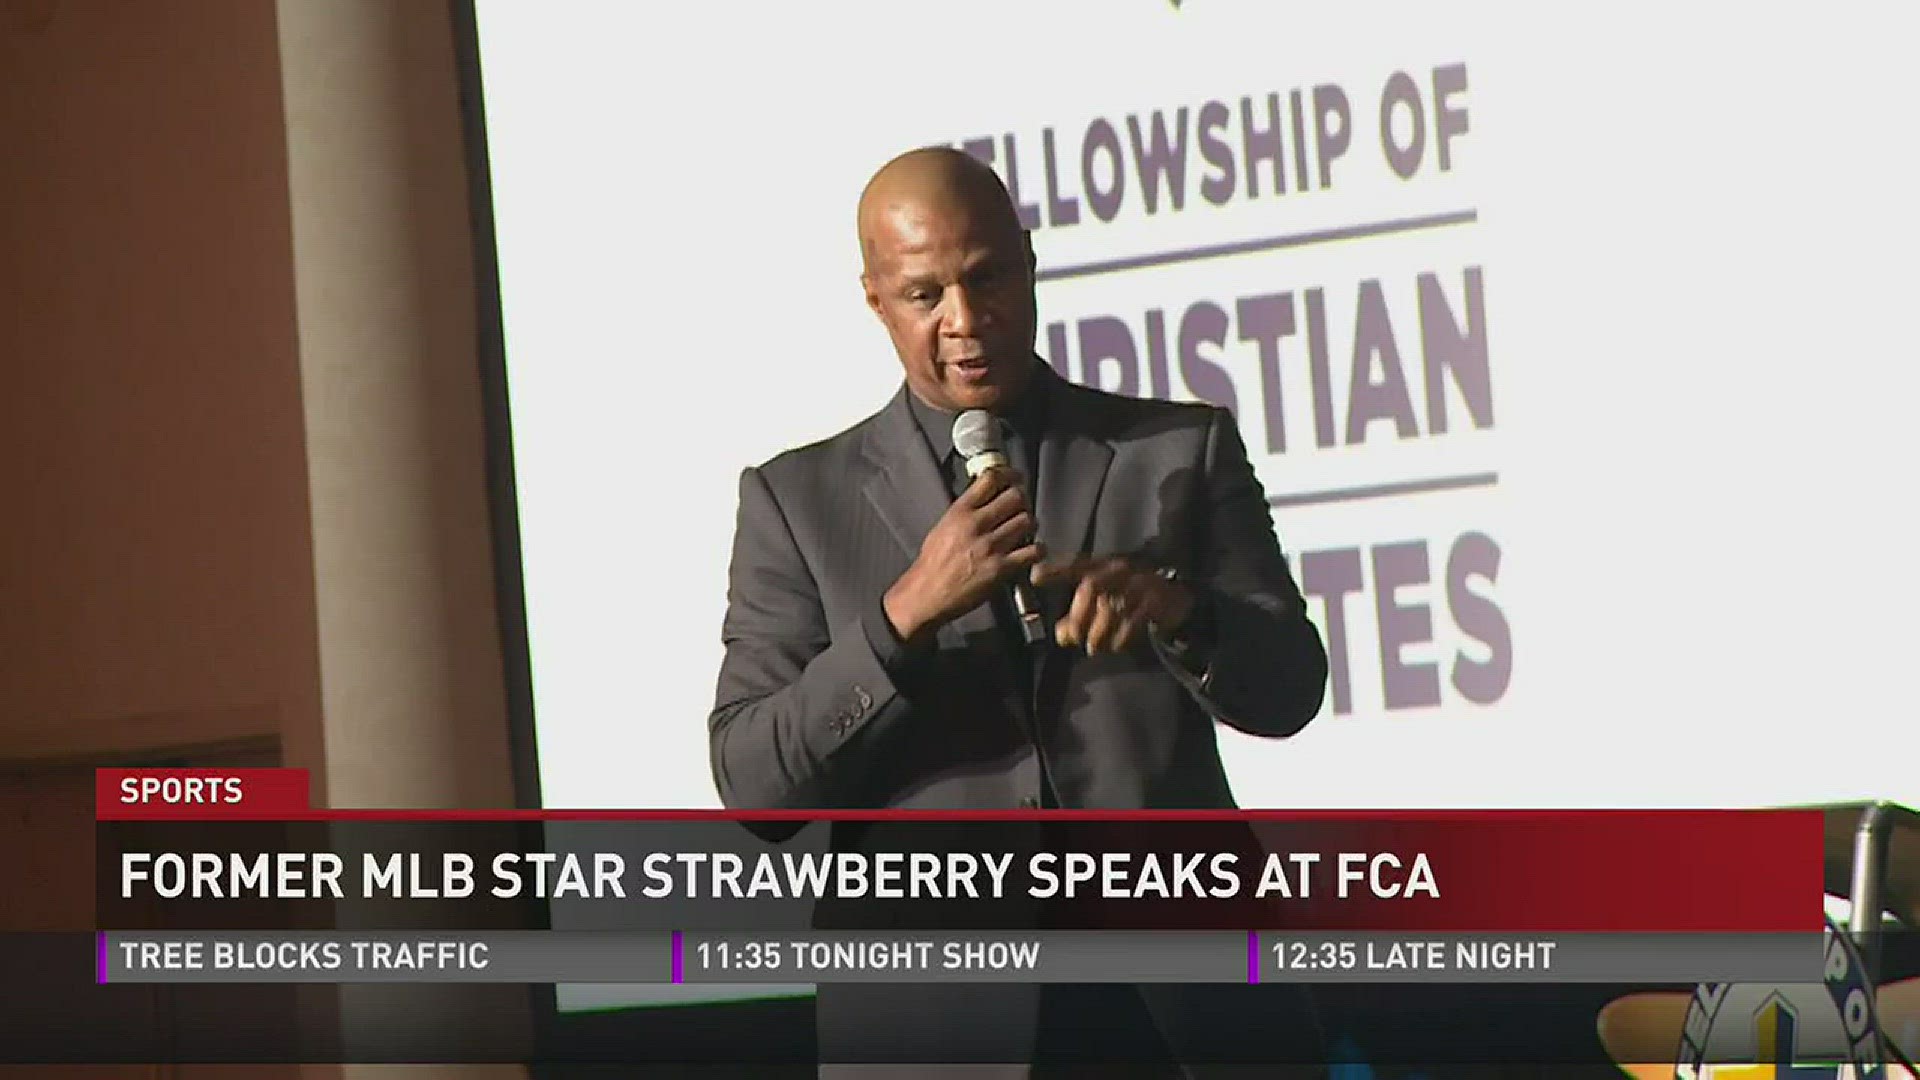 Eight-time MLB All-Star and four-time World Series champion Darryl Strawberry spoke at the Fellowship of Christian Athletes banquet in Knoxville on Monday.